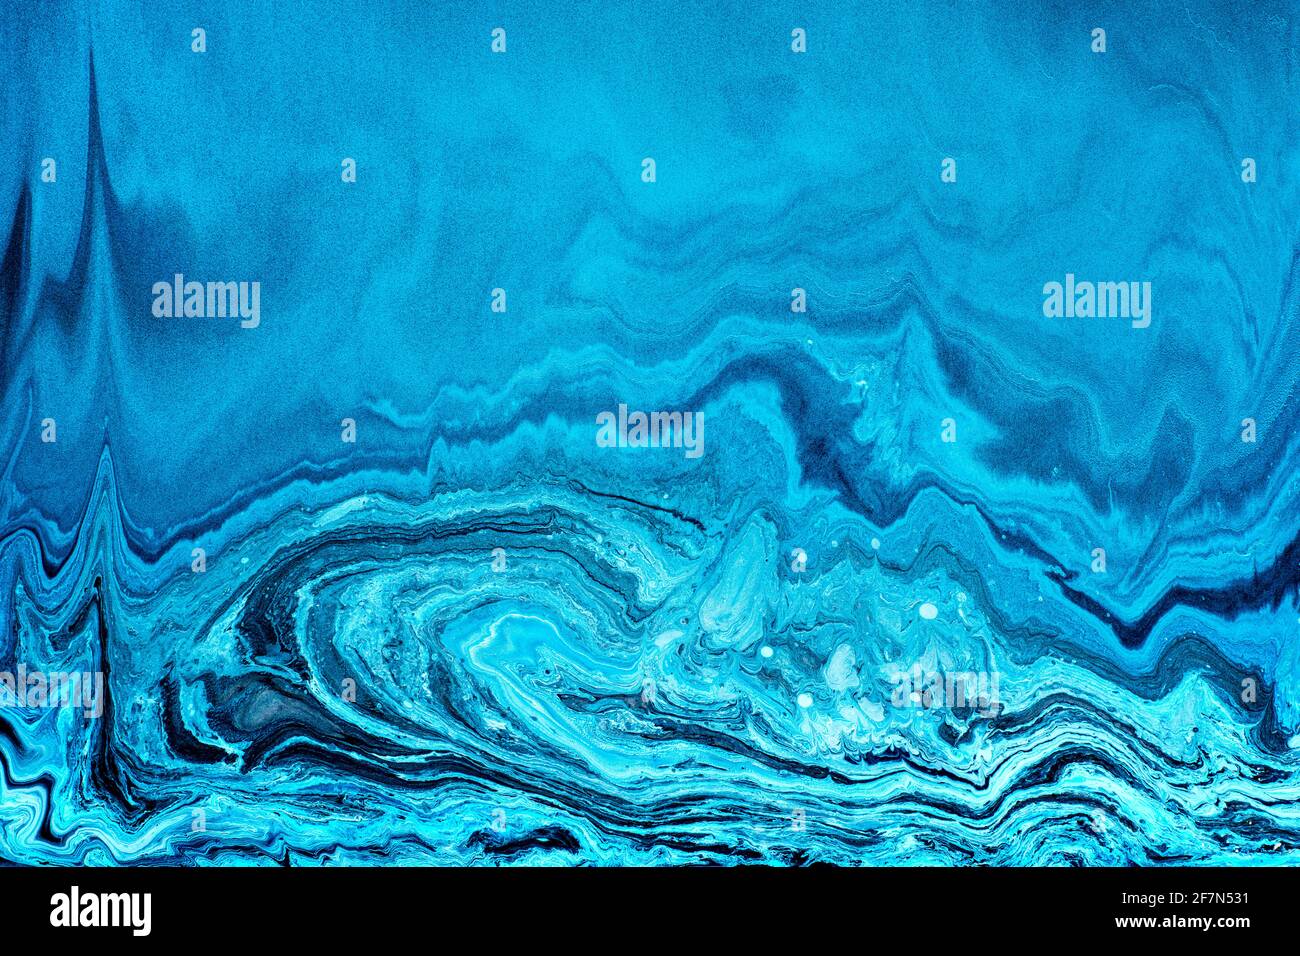 Free flowing blue and white acrylic paint. Random Waves and Curls. Abstract marble background or texture. Stock Photo